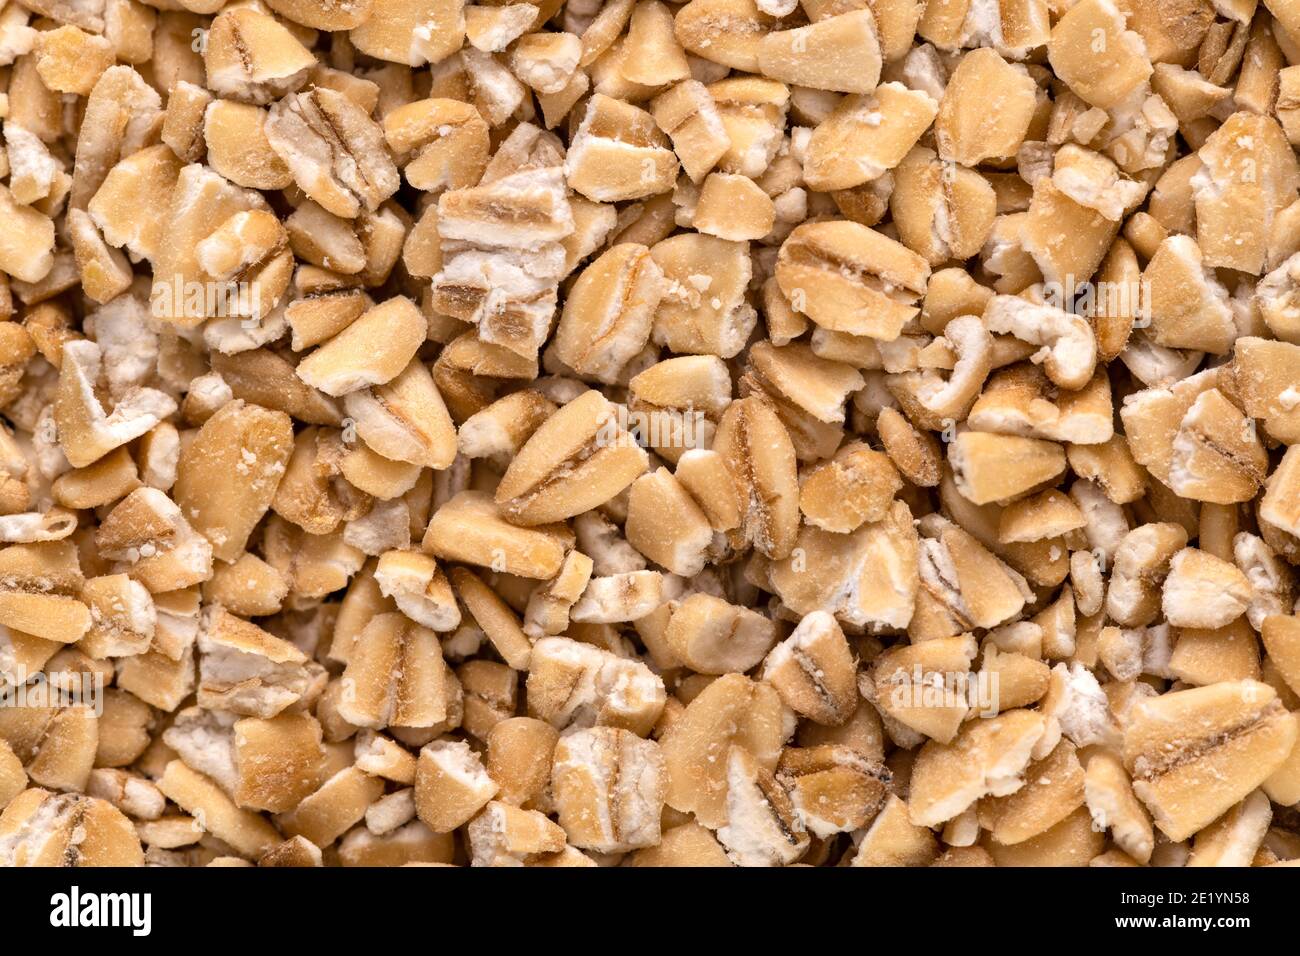 Macro of steel-cut oats, or Irish oats, background and texture. Stock Photo